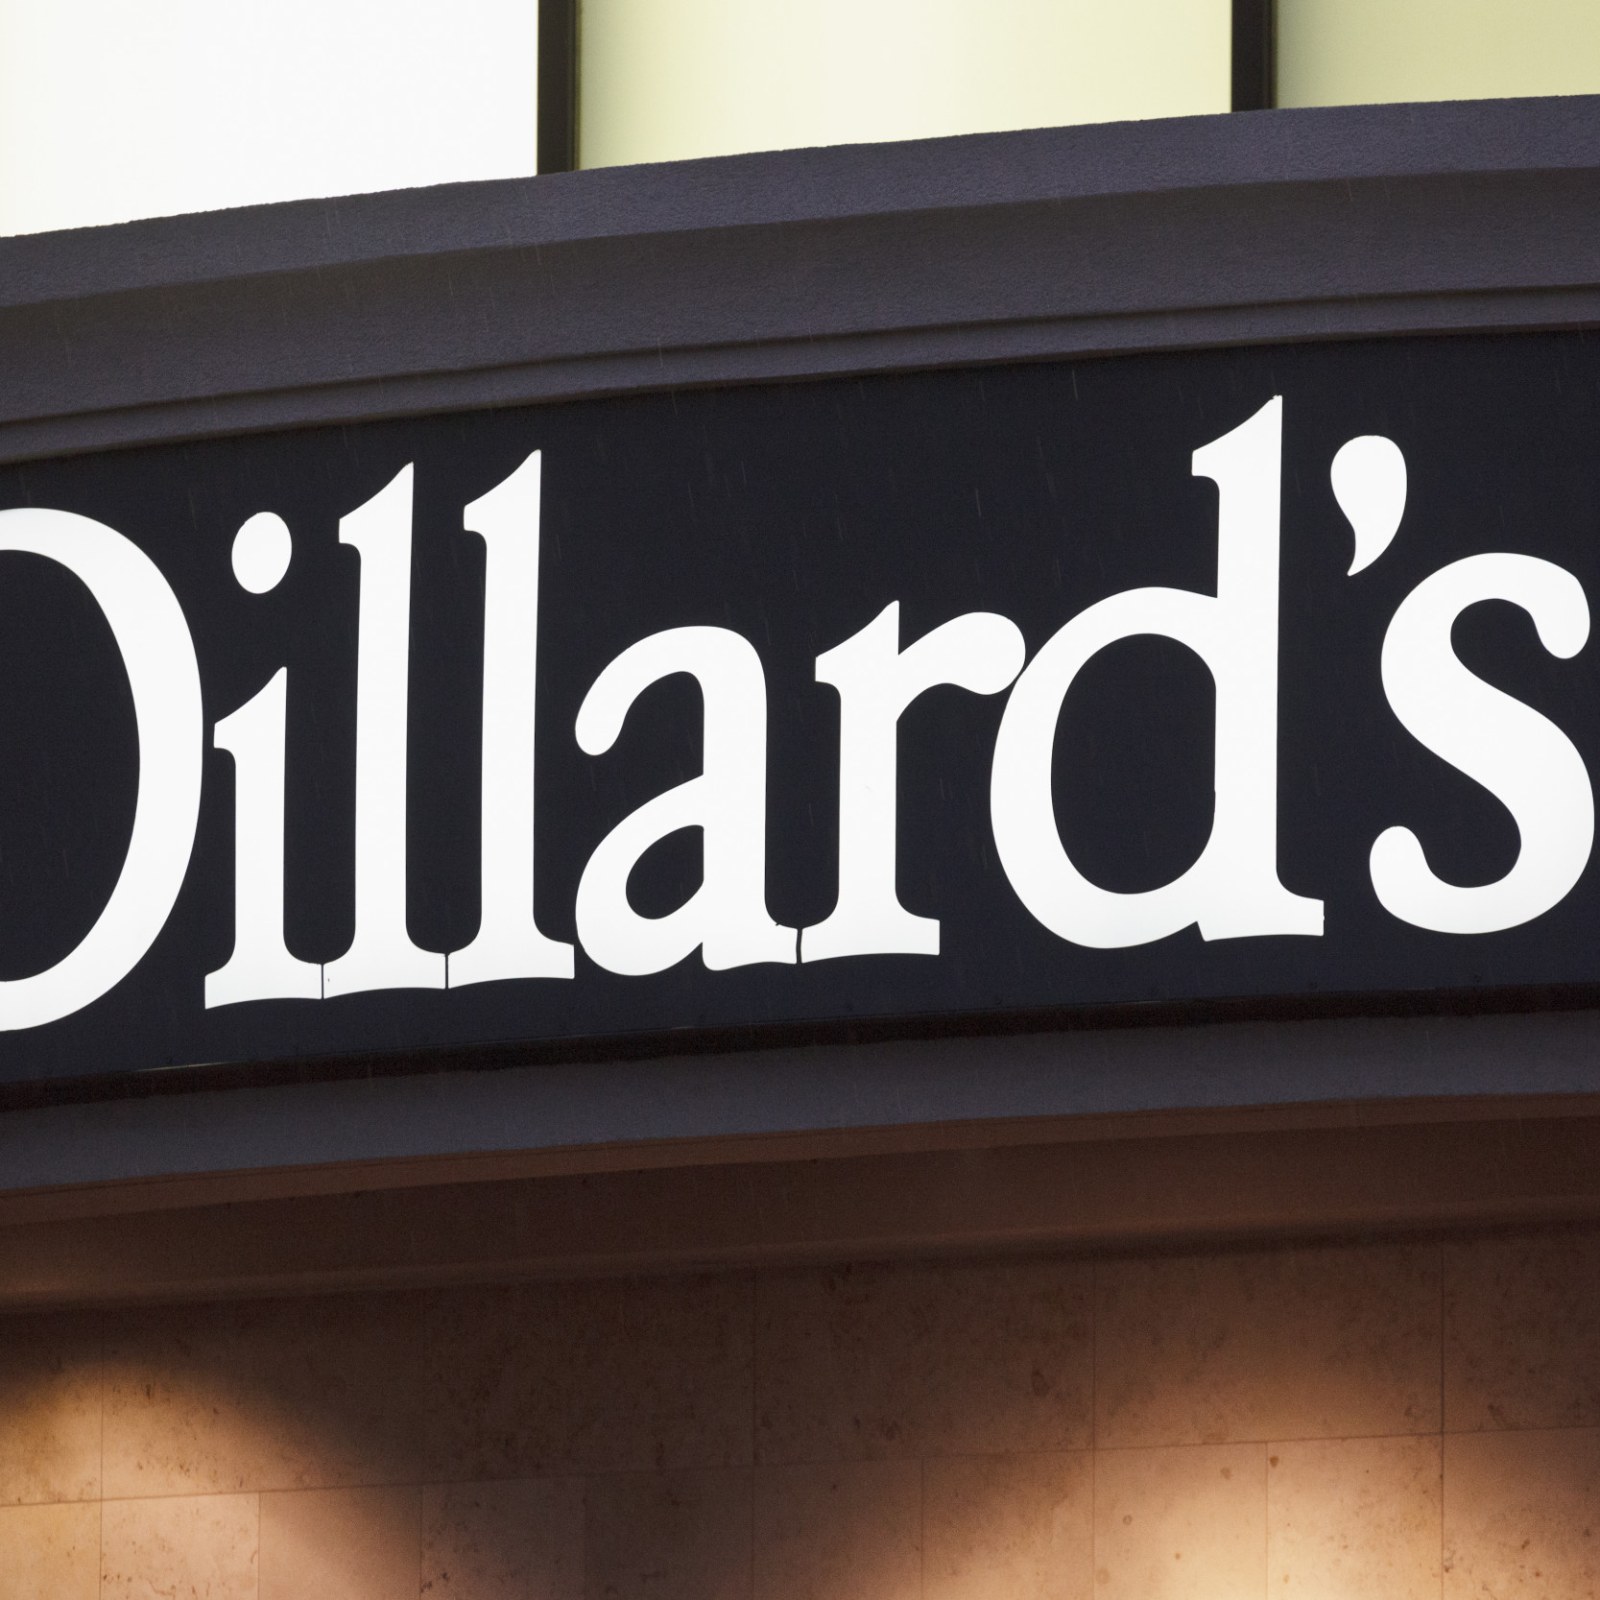 Will the Dillard's New Year's Day Sale Take Place in 2022?